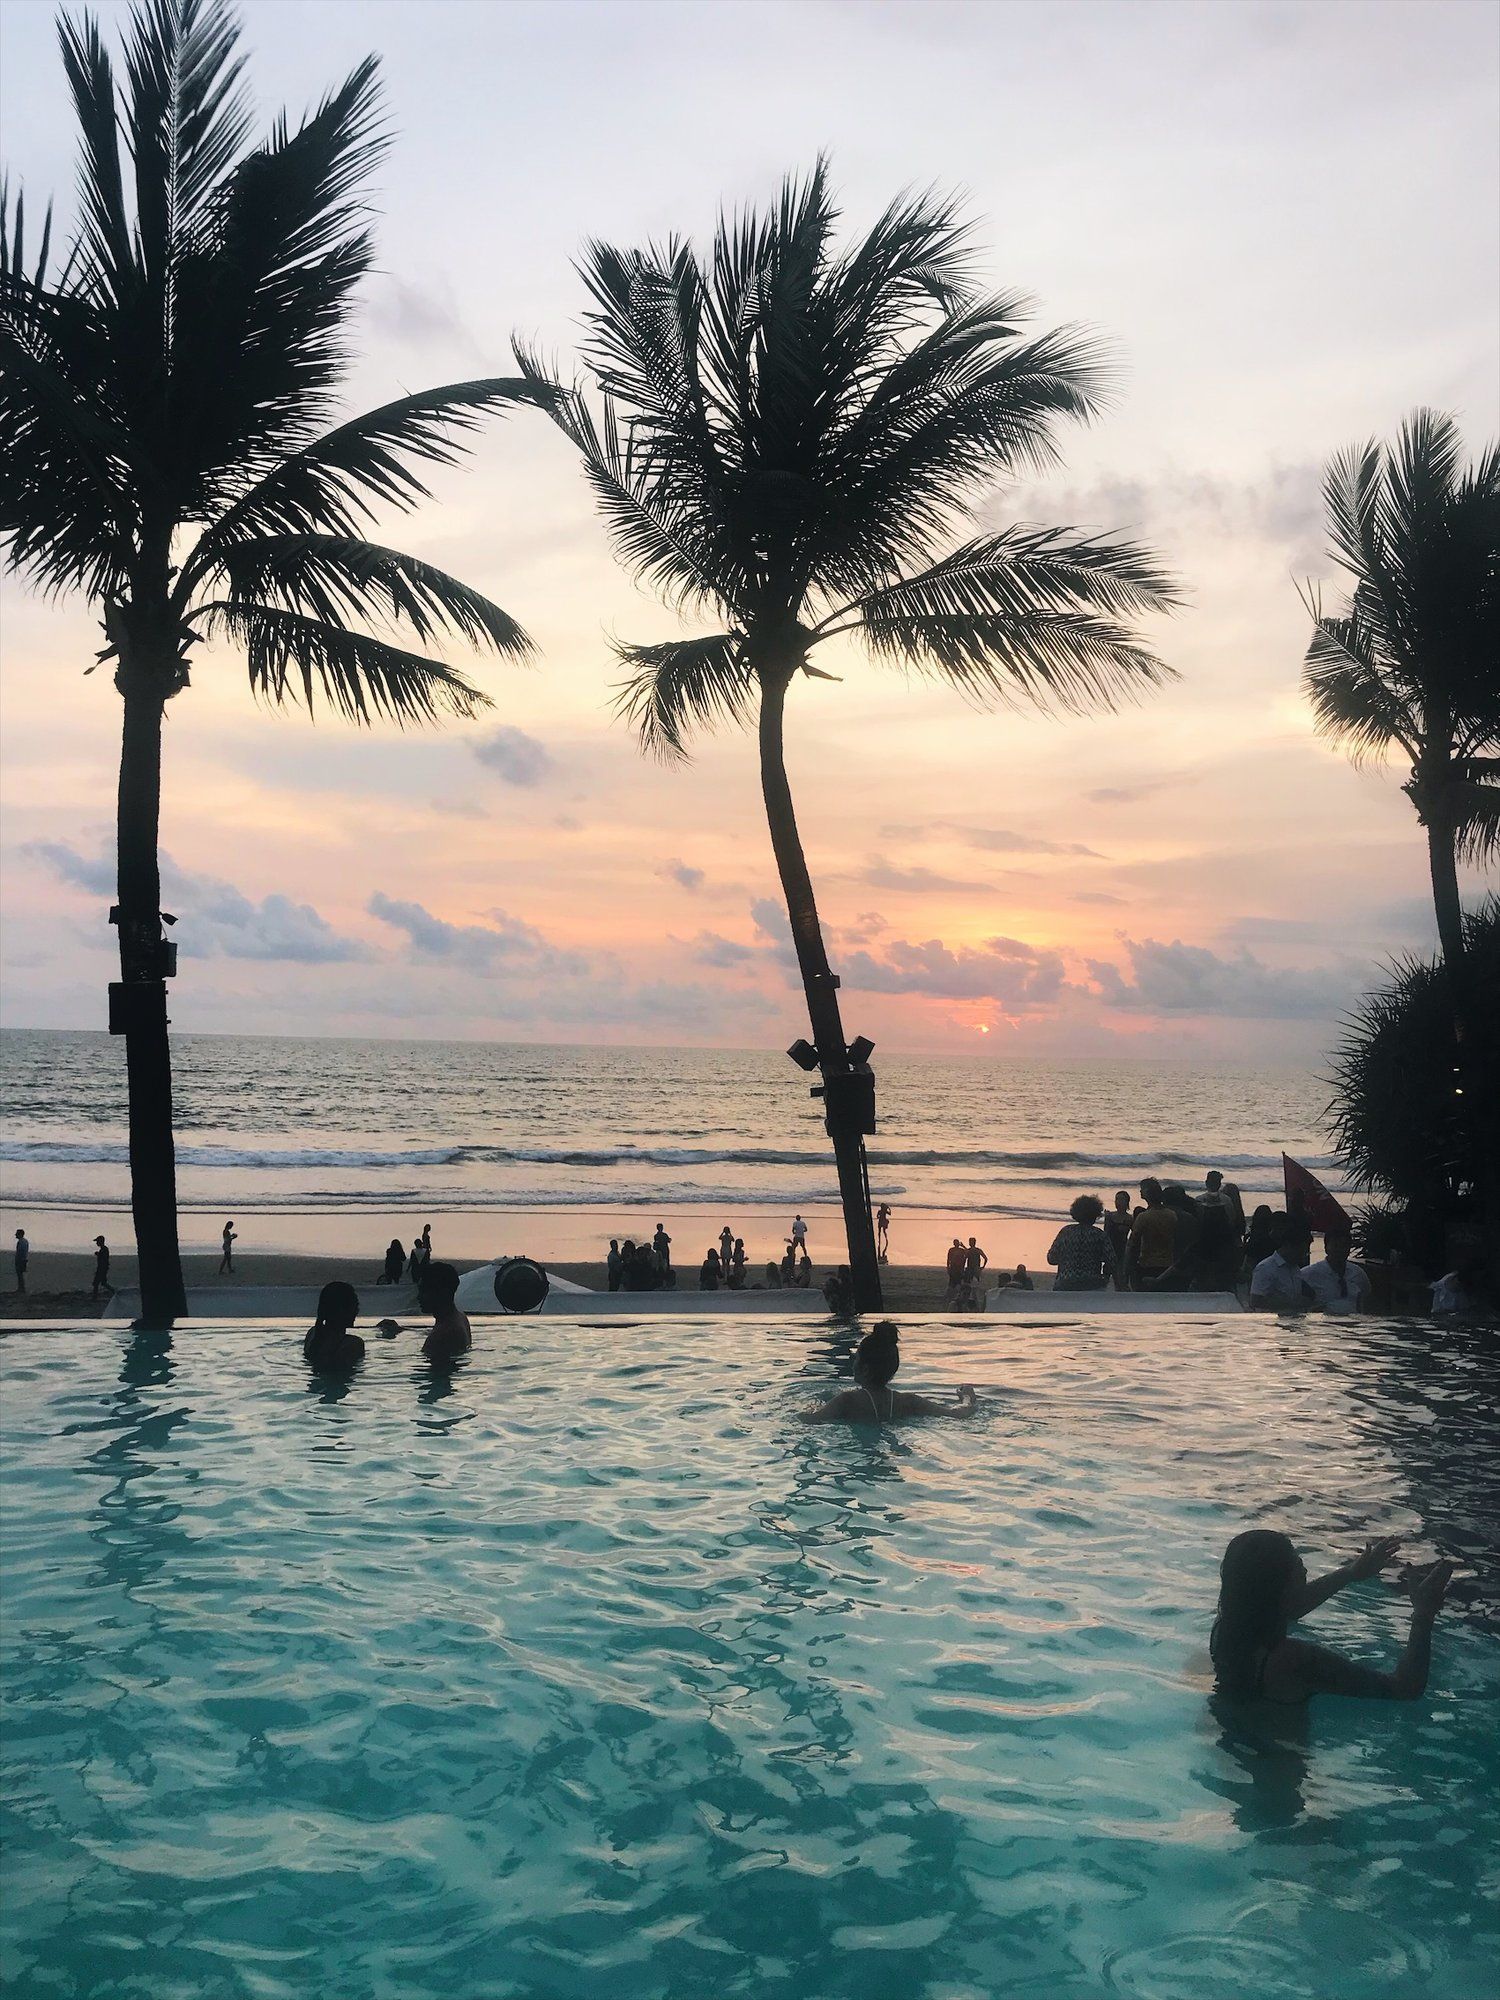 10 Best Bars / Clubs to Visit in Bali! -   6 holiday Beach sunsets
 ideas